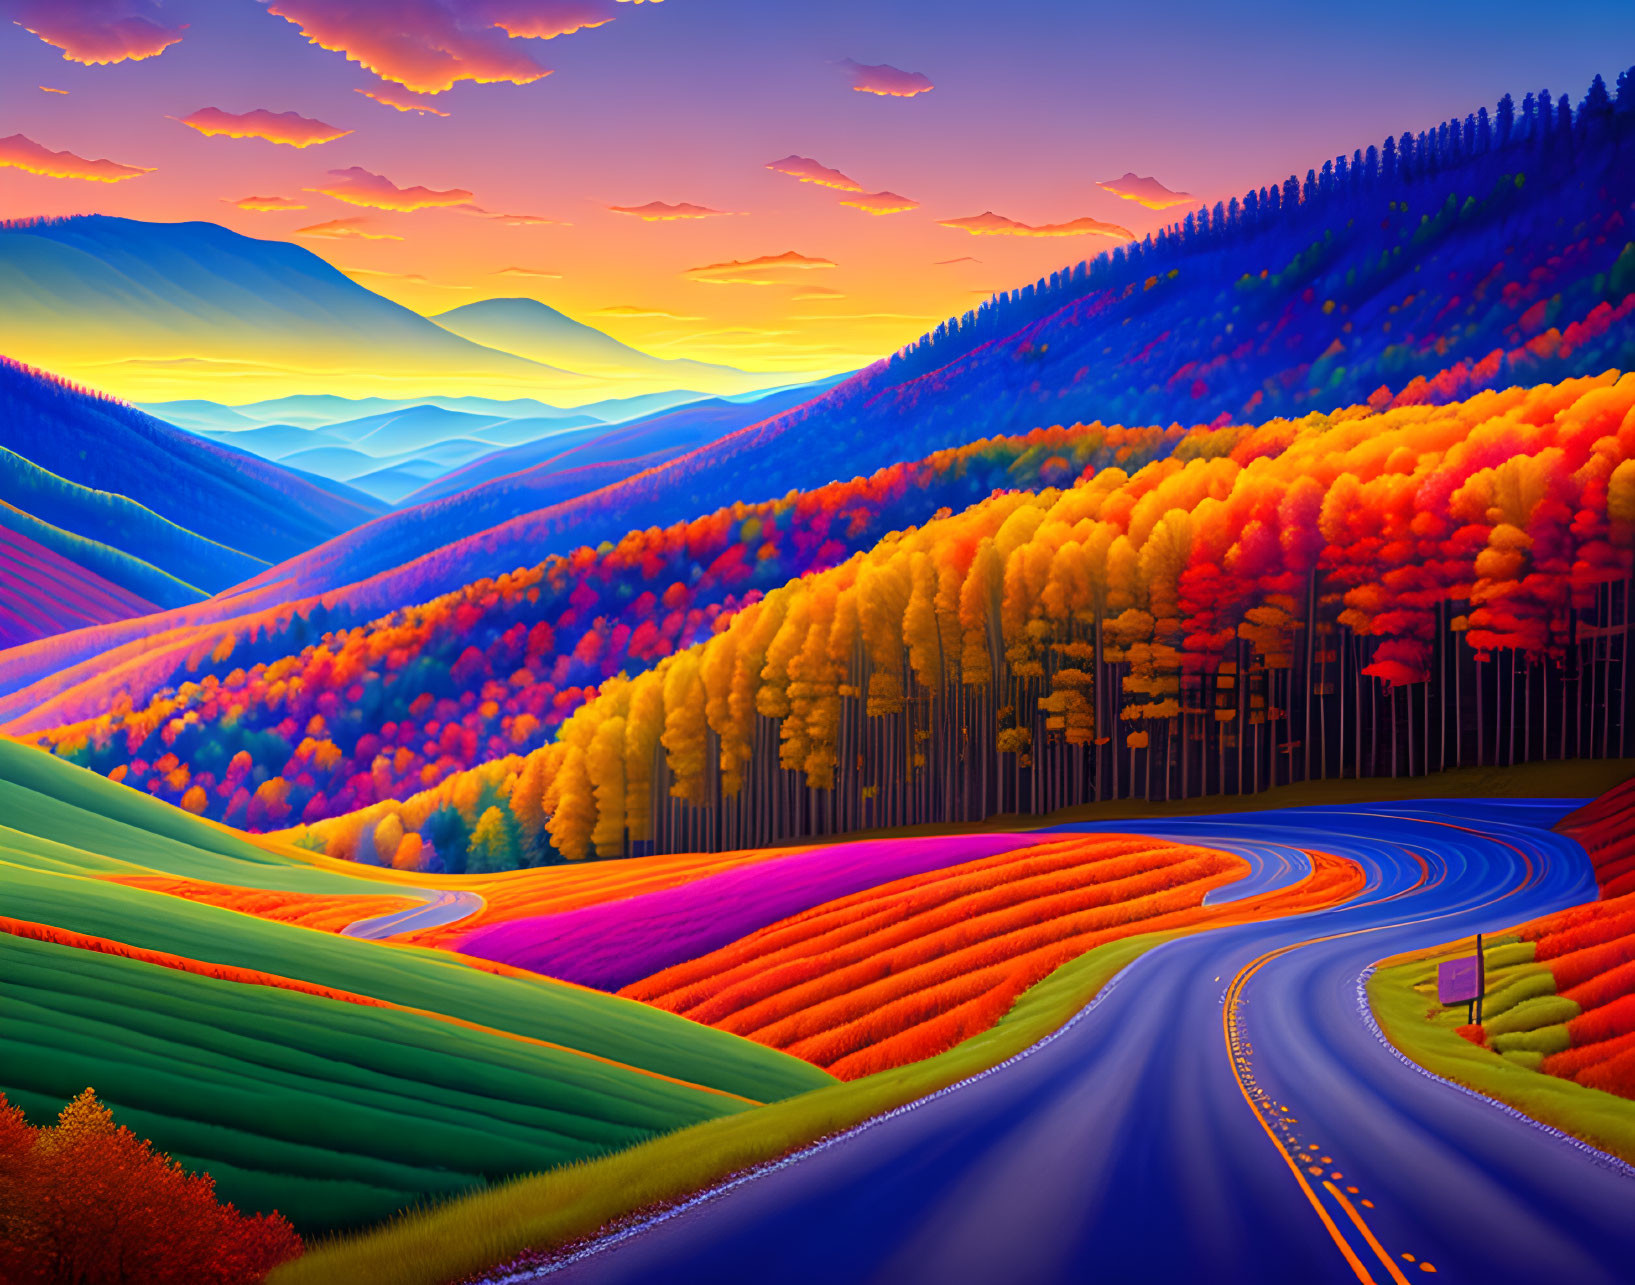 Colorful landscape: winding road, rolling hills, autumn trees, dramatic sunset